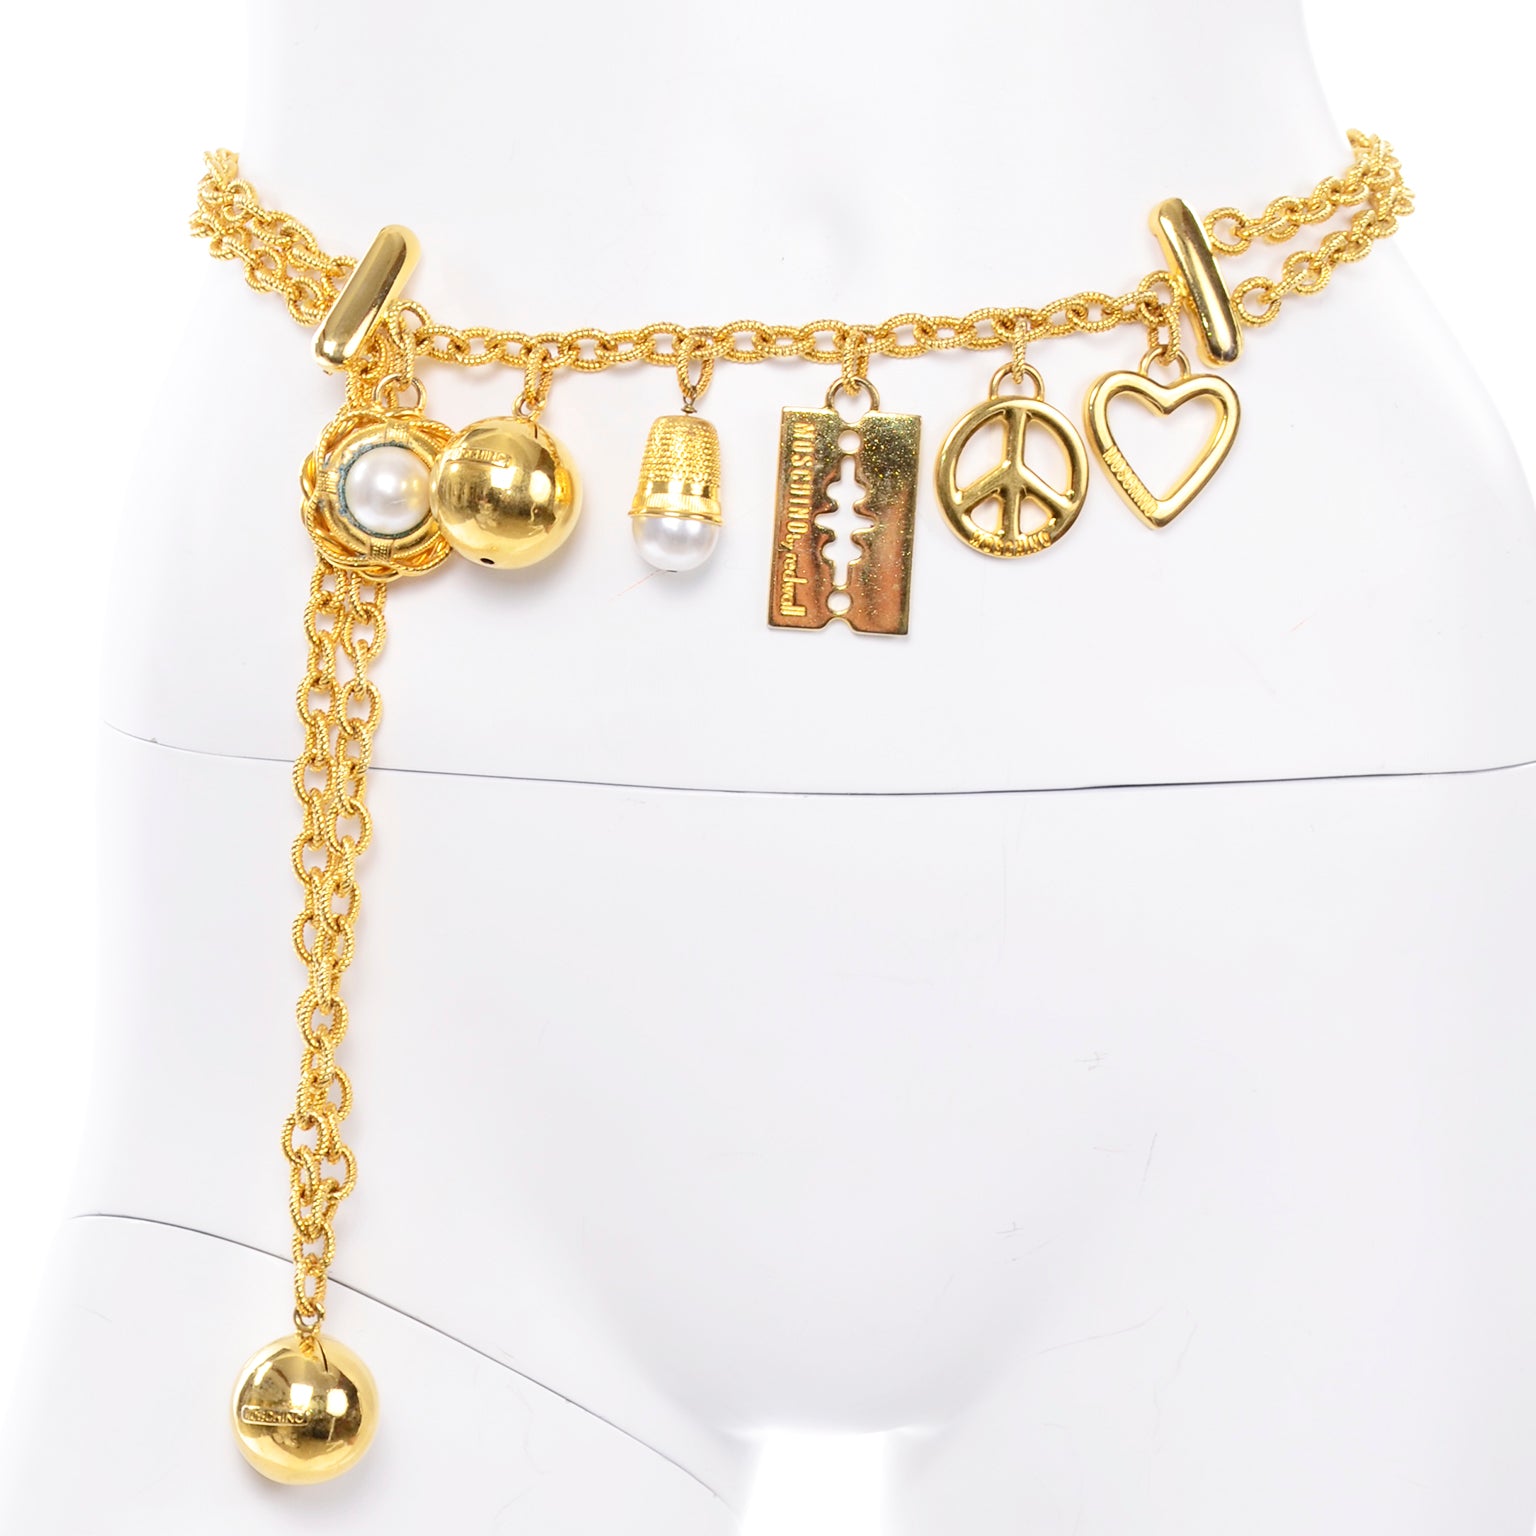 Iconic Moschino Vintage Chunky Gold Chain Charm Belt or Necklace